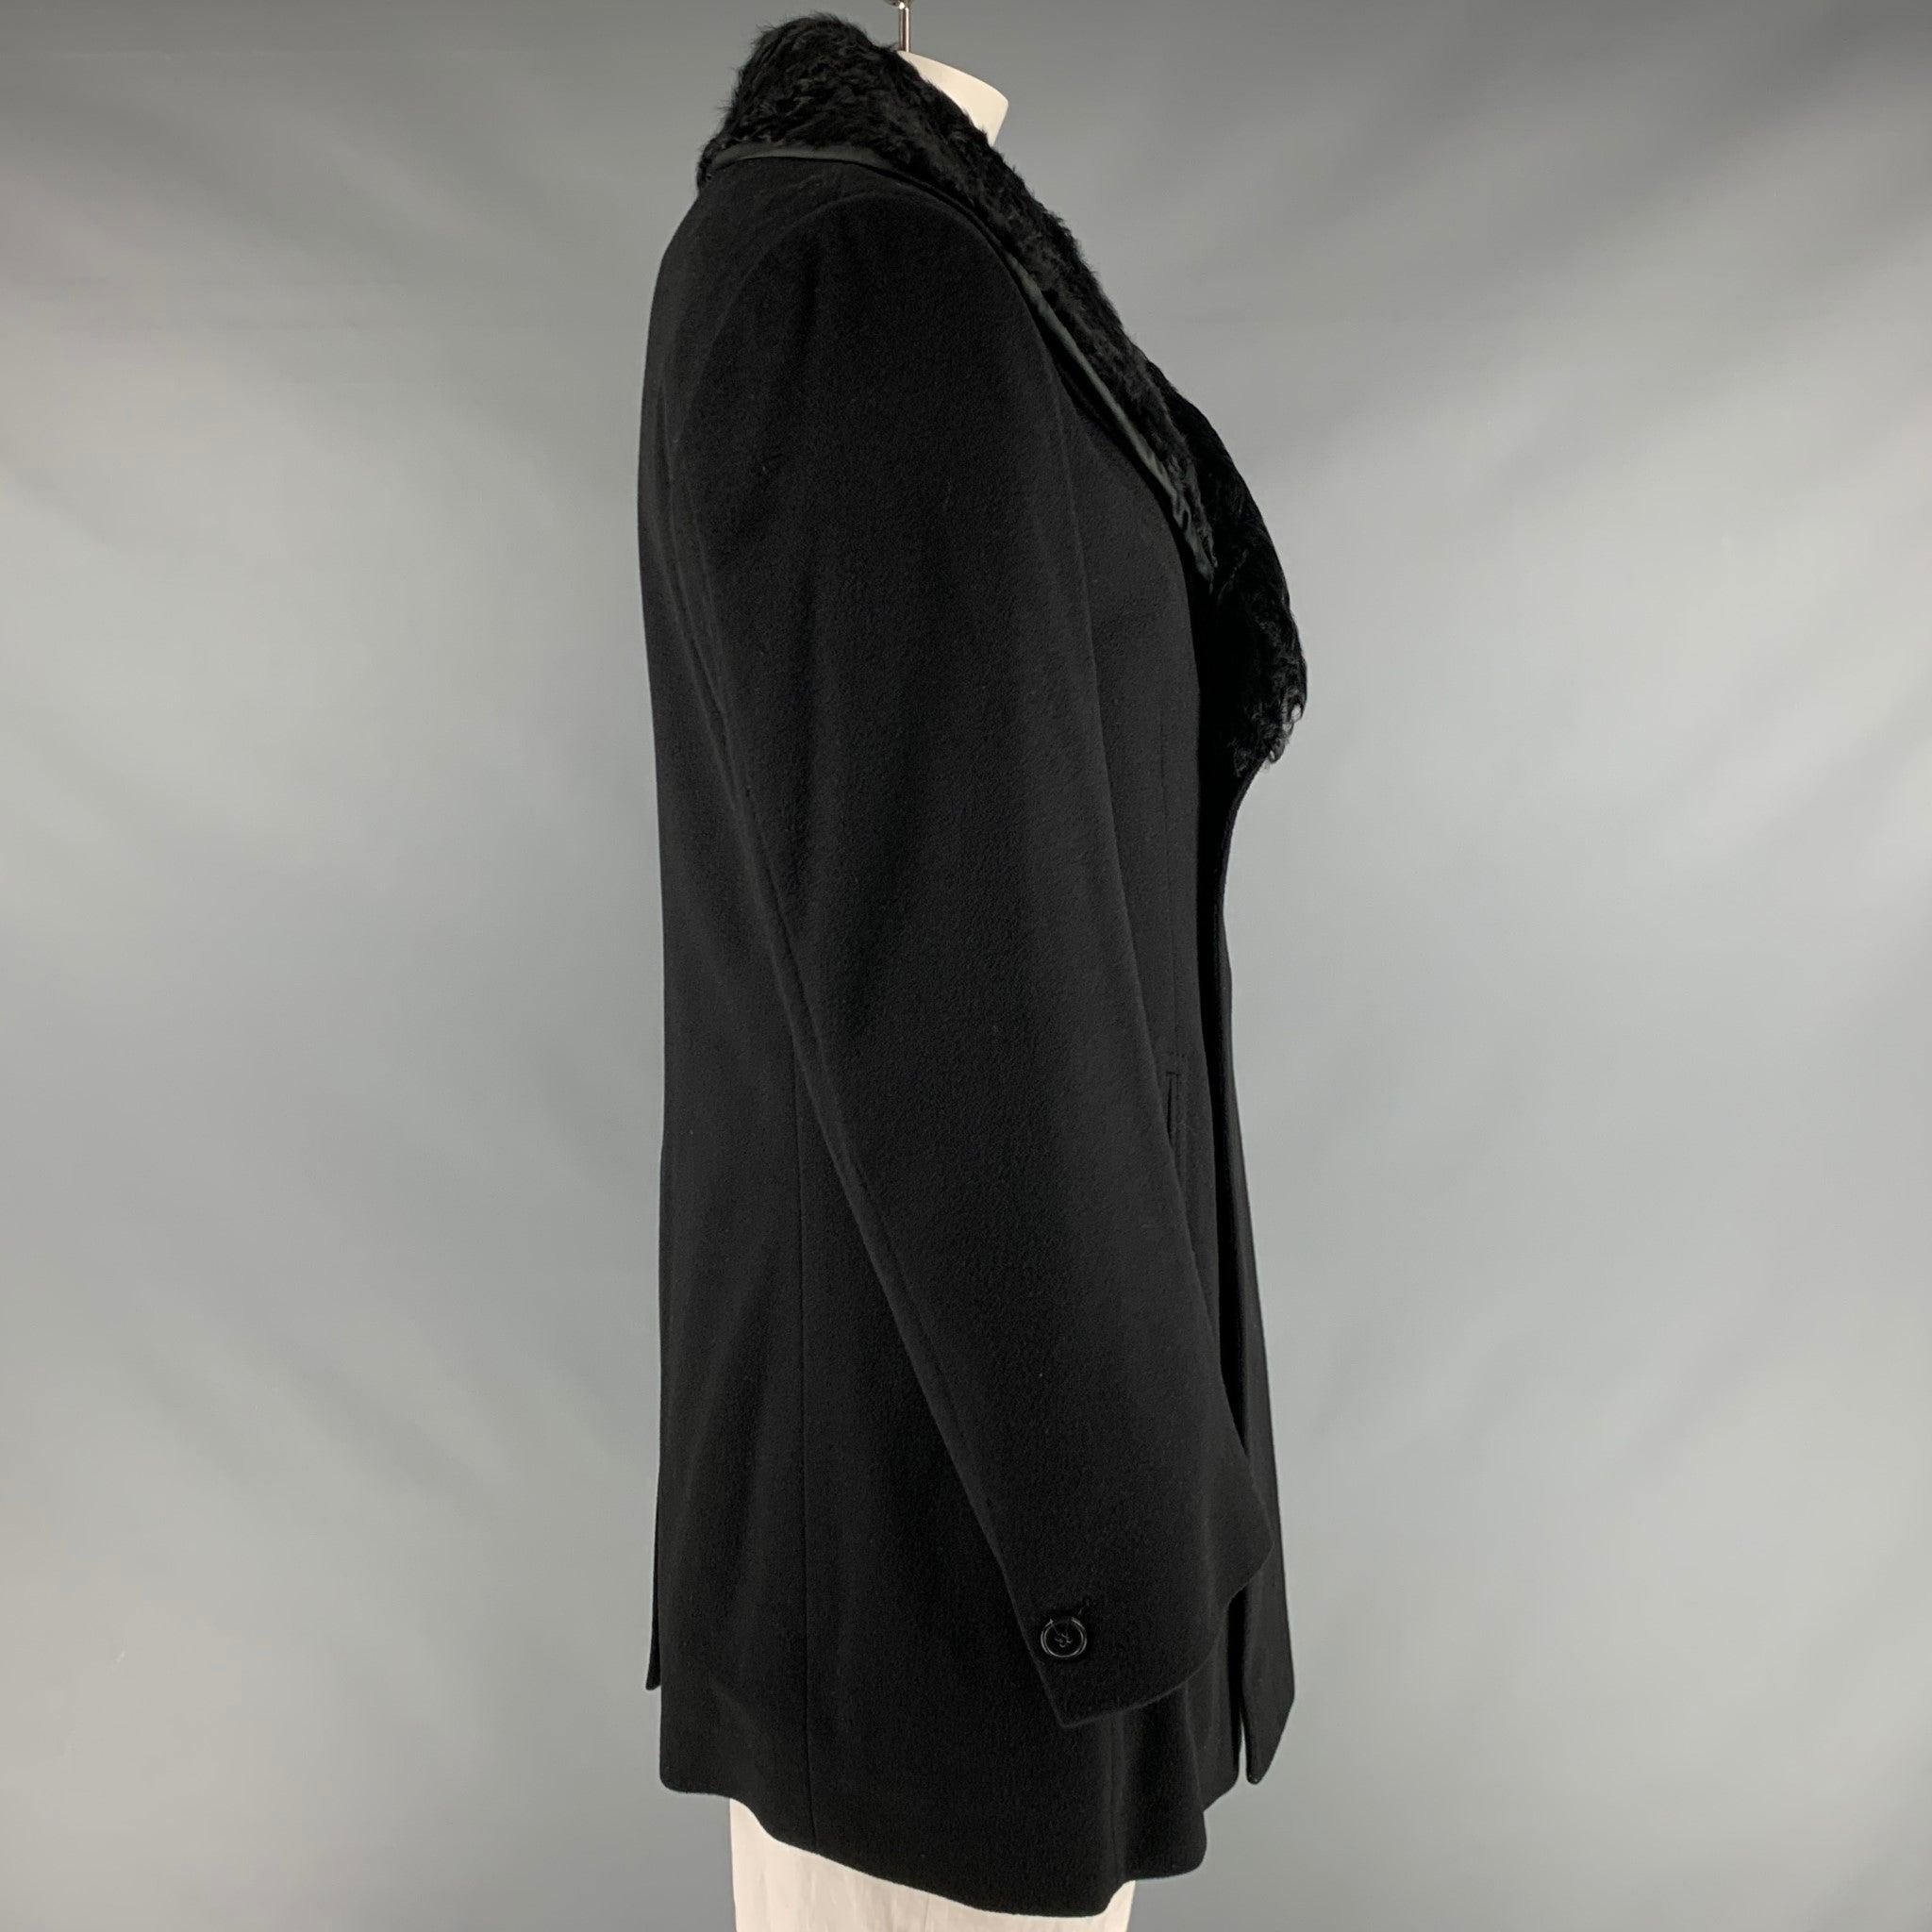 Z ZEGNA Size 46 Black Cashmere Double Breasted Coat In Excellent Condition For Sale In San Francisco, CA